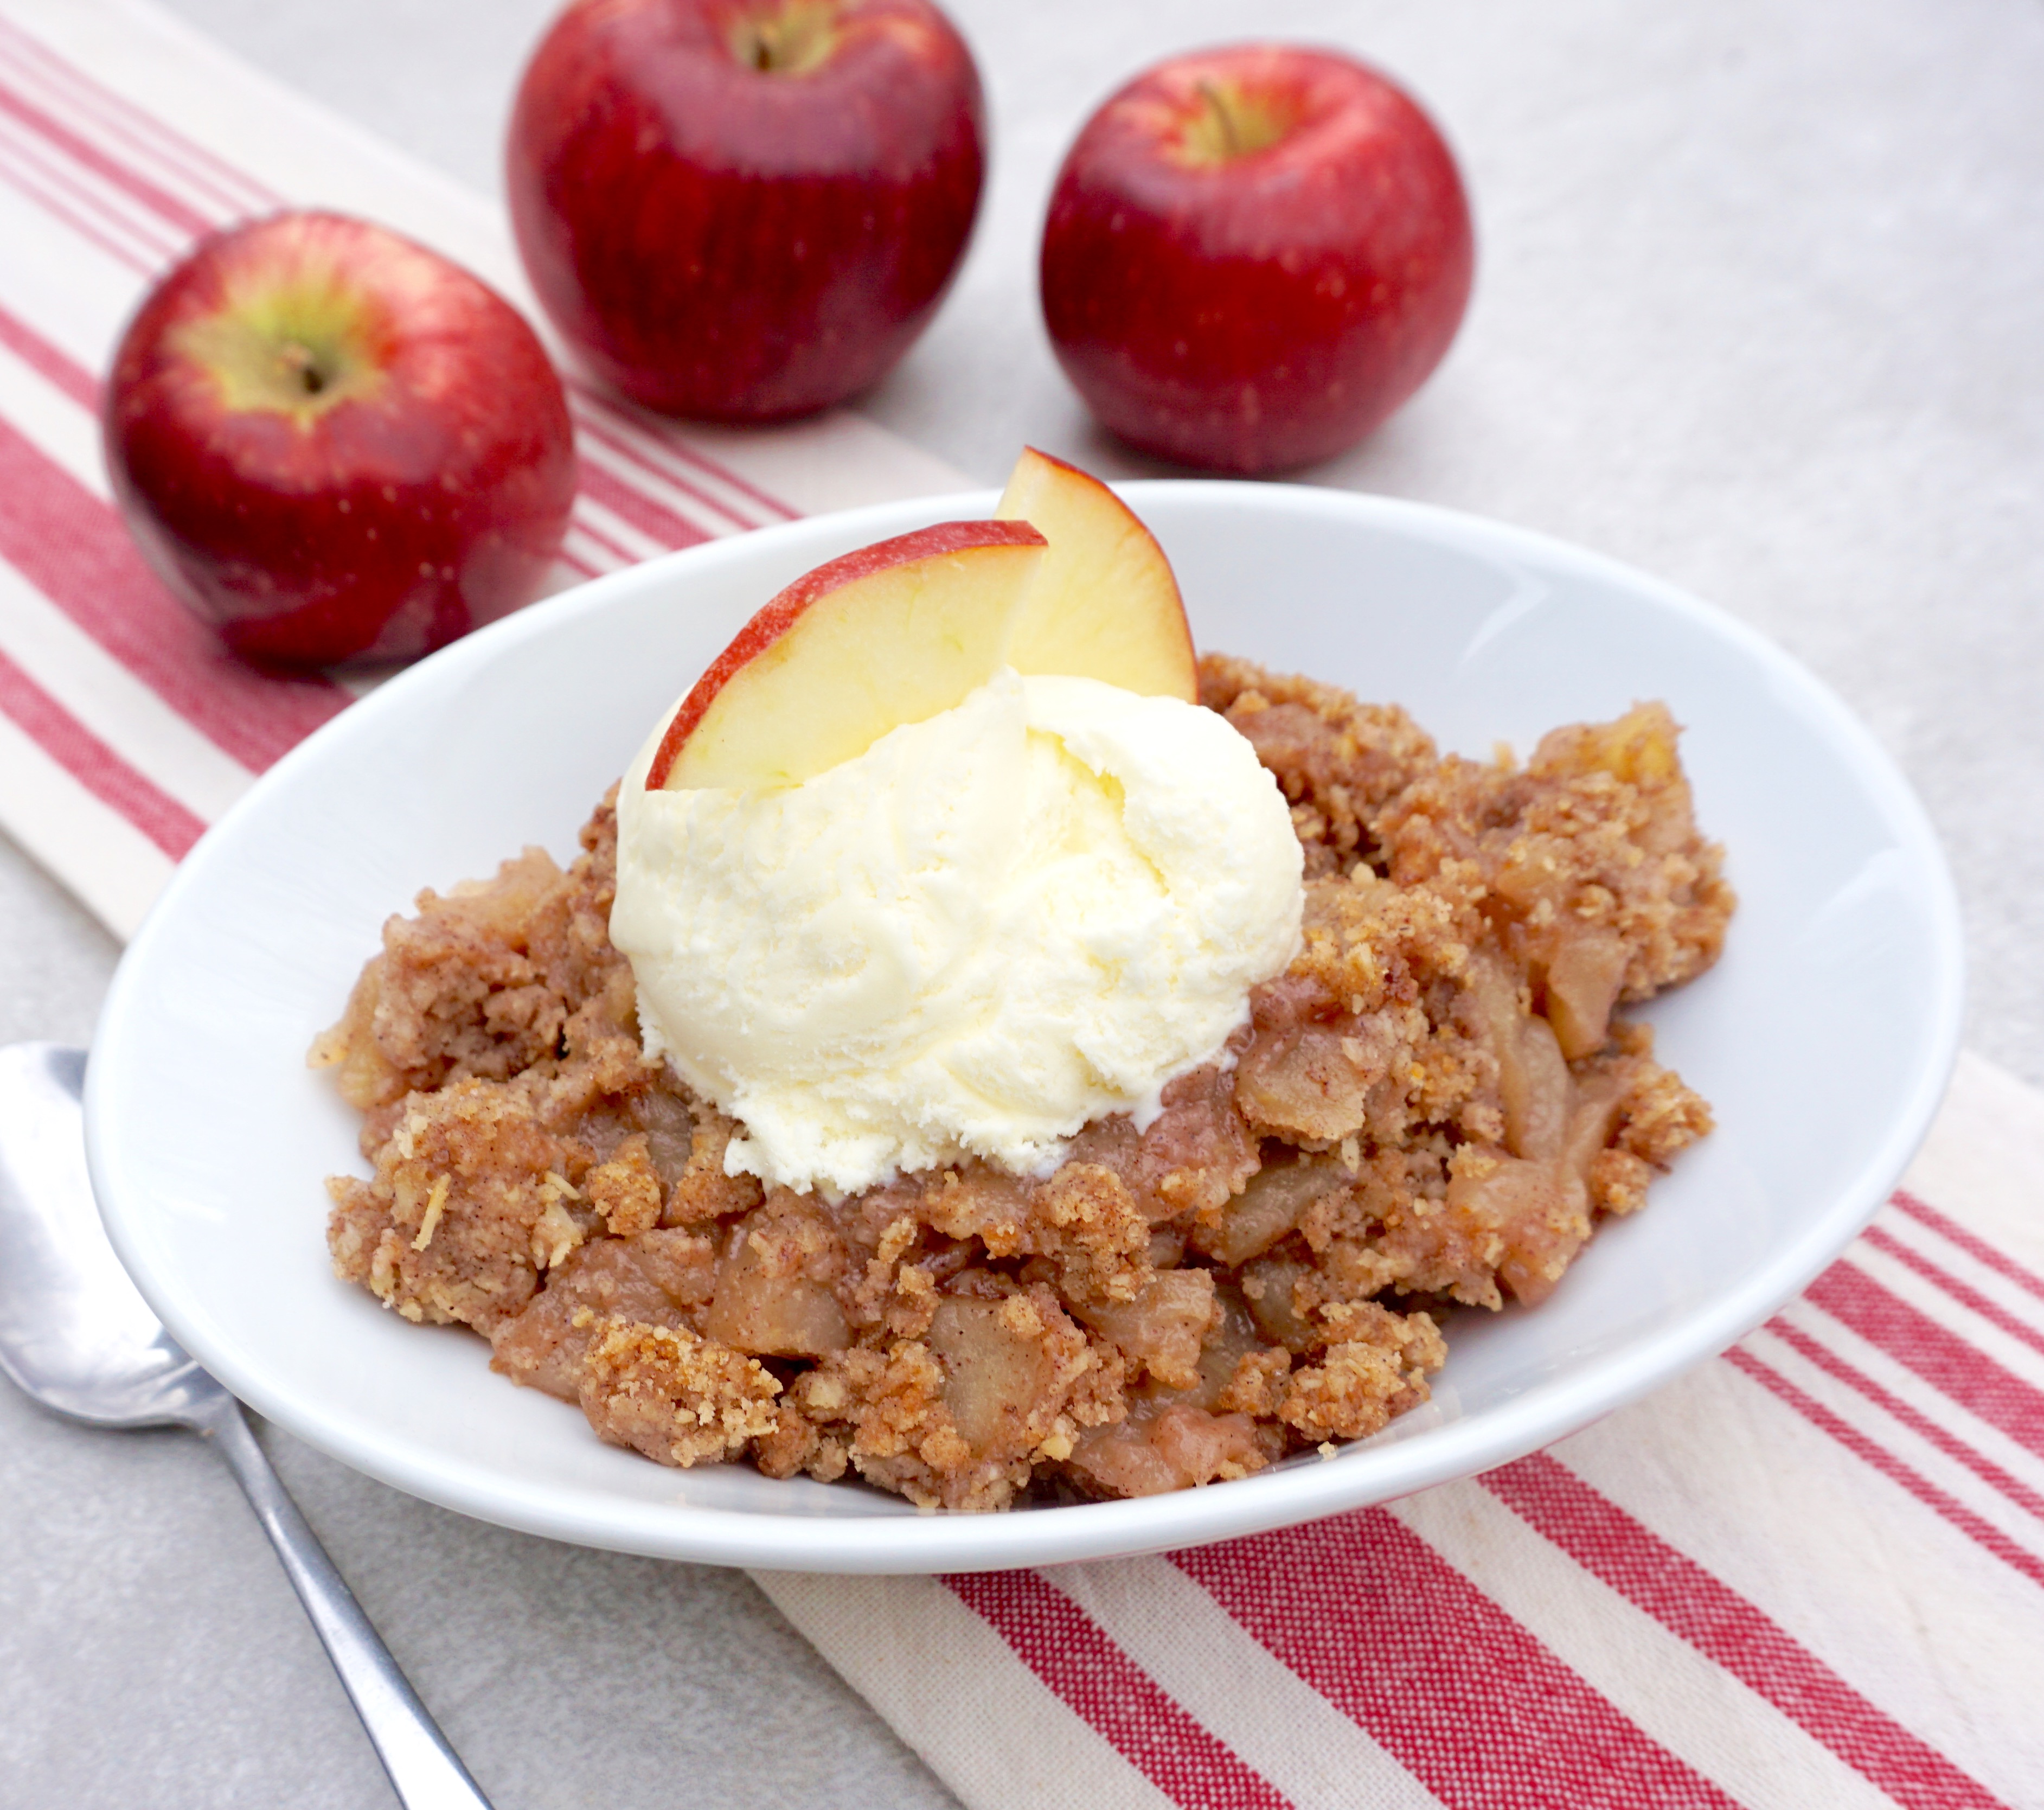 Apple Crumble is a baked apple dessert with a crumble topping.